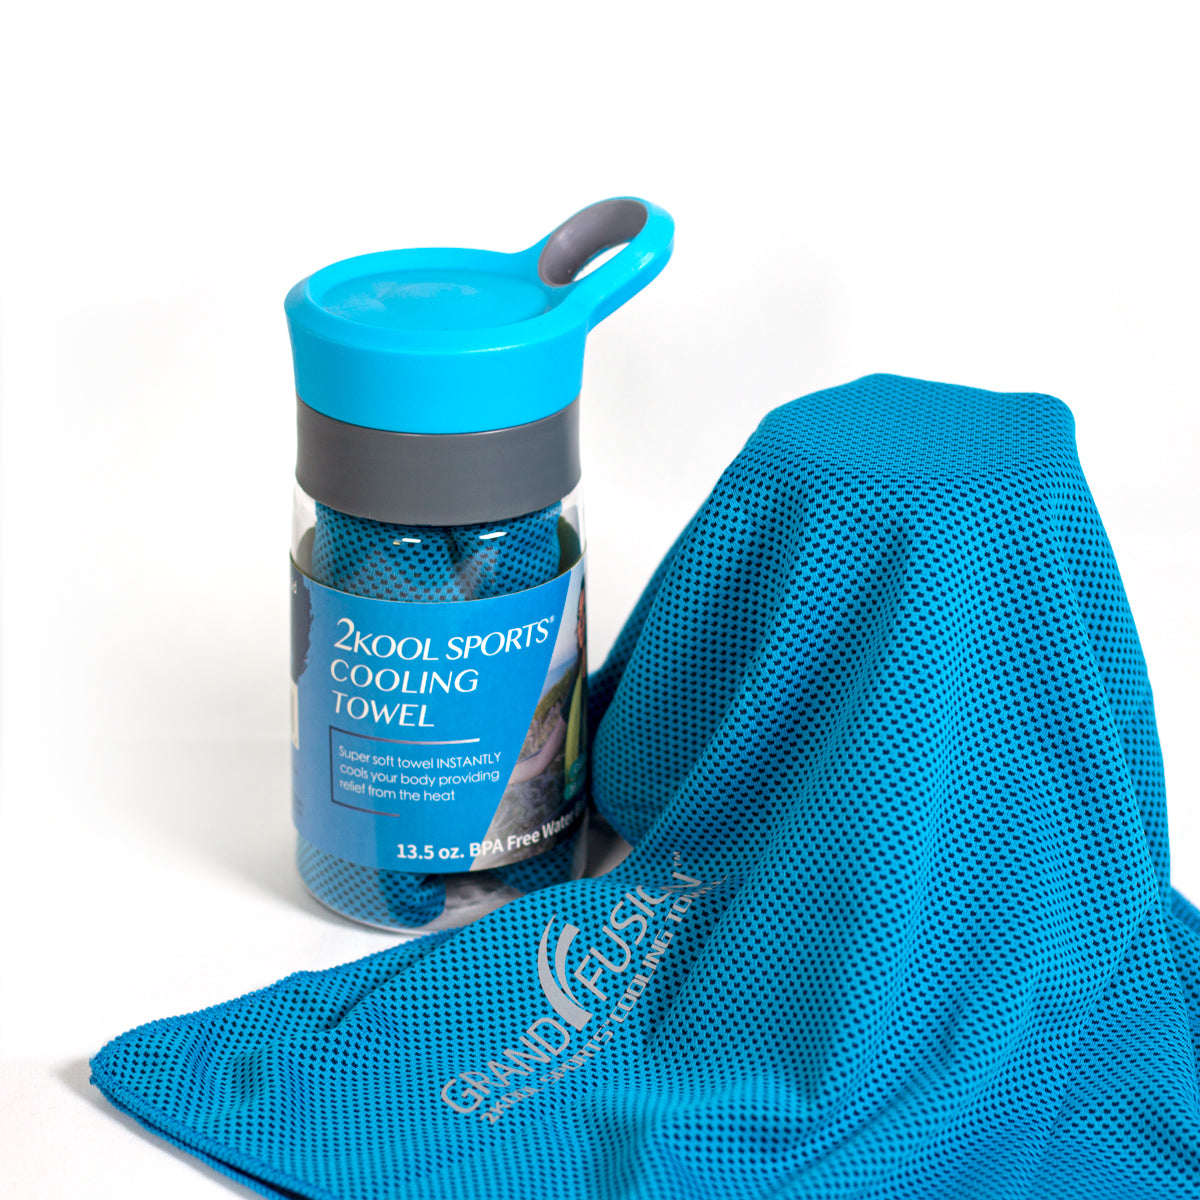 COOLING TOWEL with 13.5 oz. BPA Free Tritan Water Bottle - From Grand Fusion by Grand Fusion Housewares, LLC